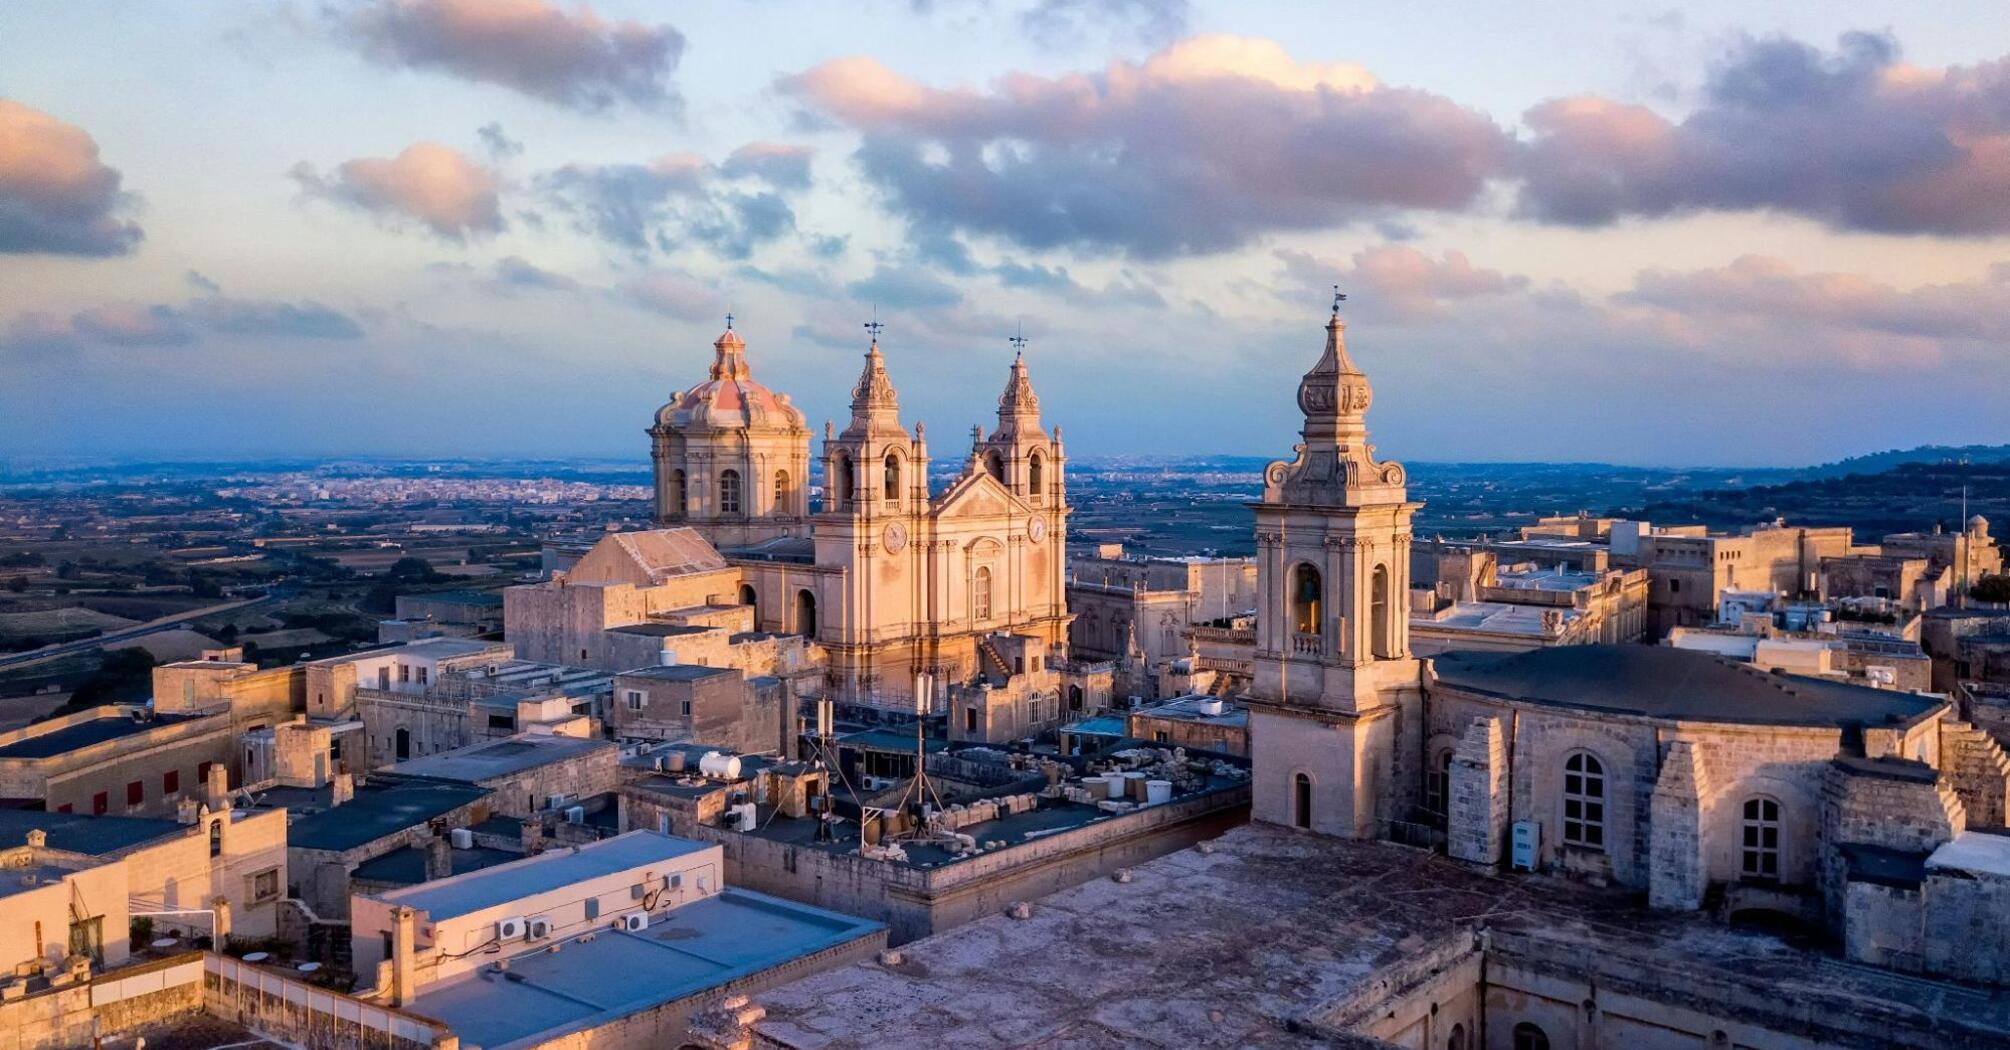 St. Paul Cathedral in medieval city Mdina, Malta